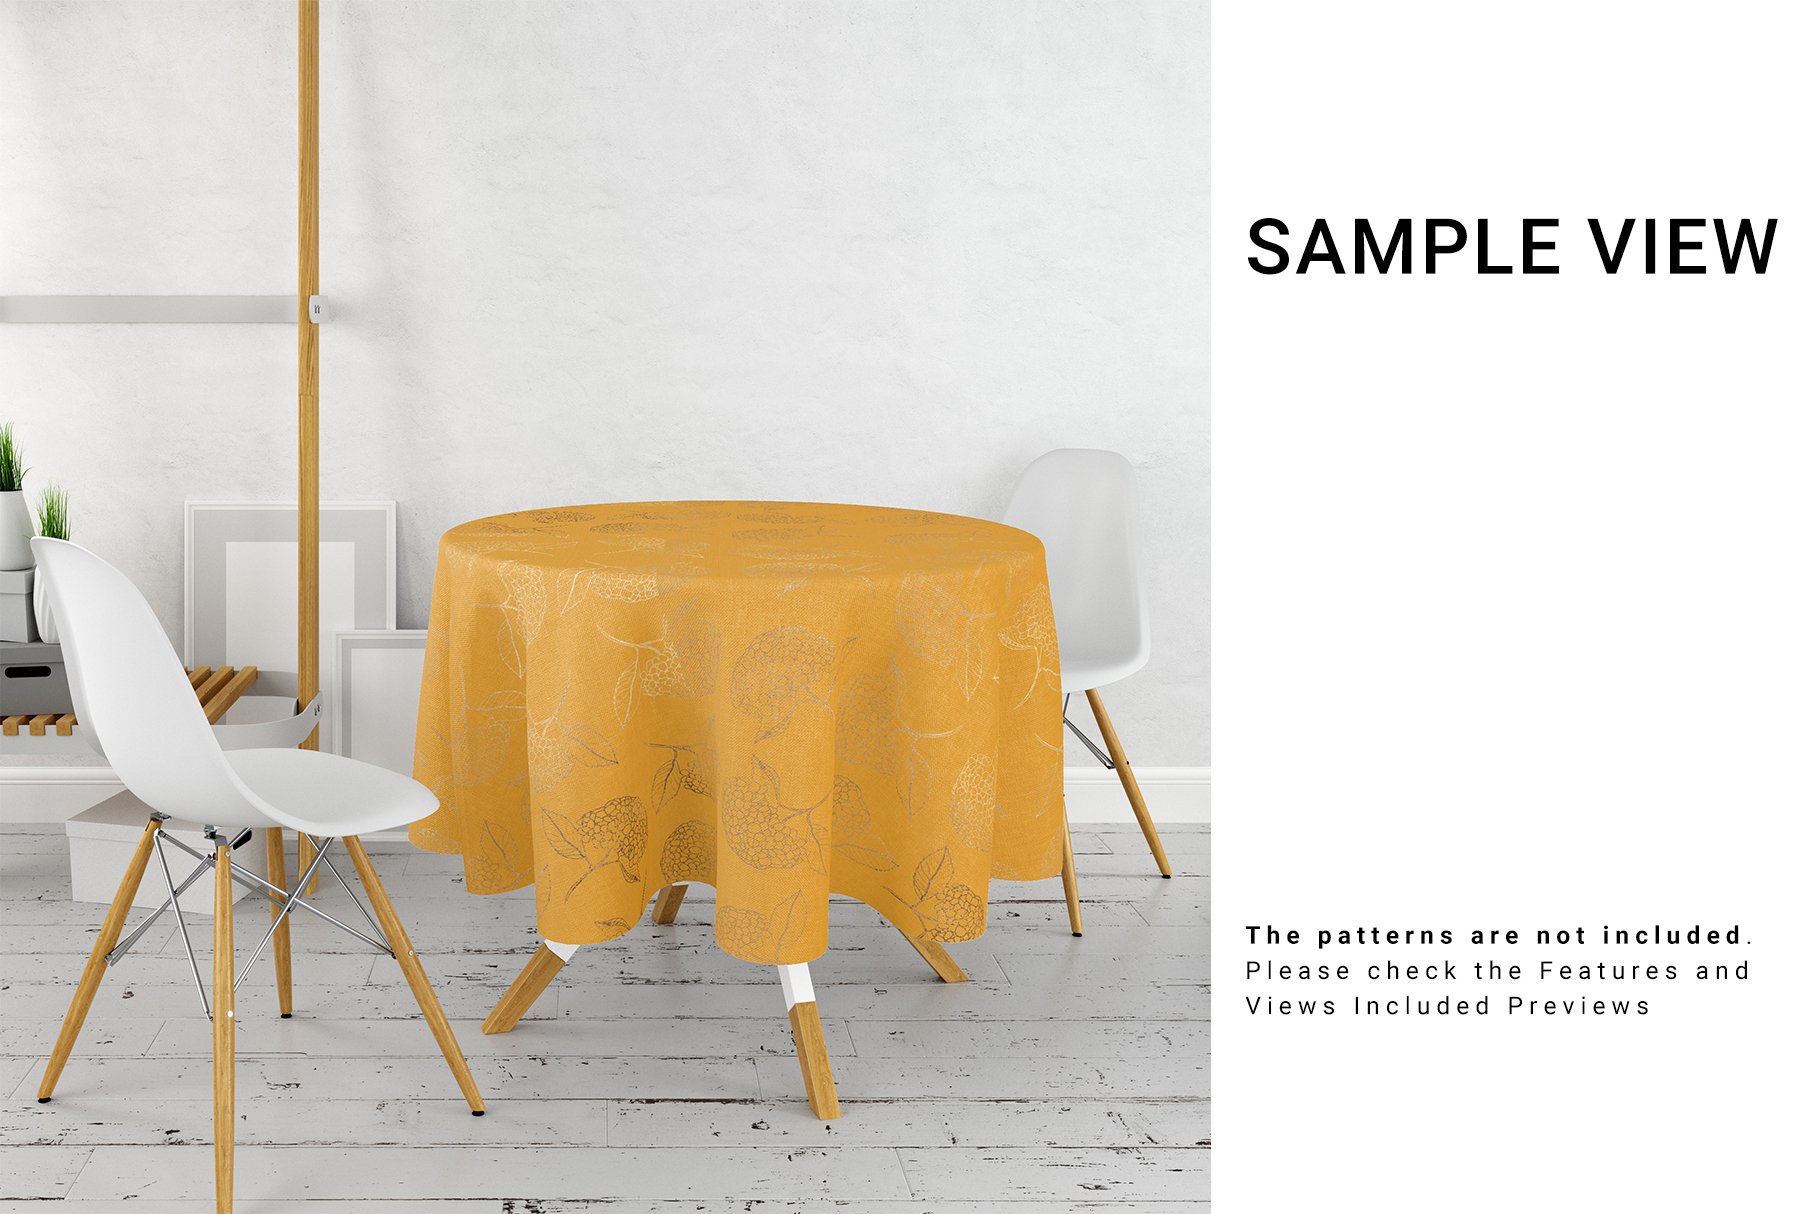 Round Tablecloth Mockup 2